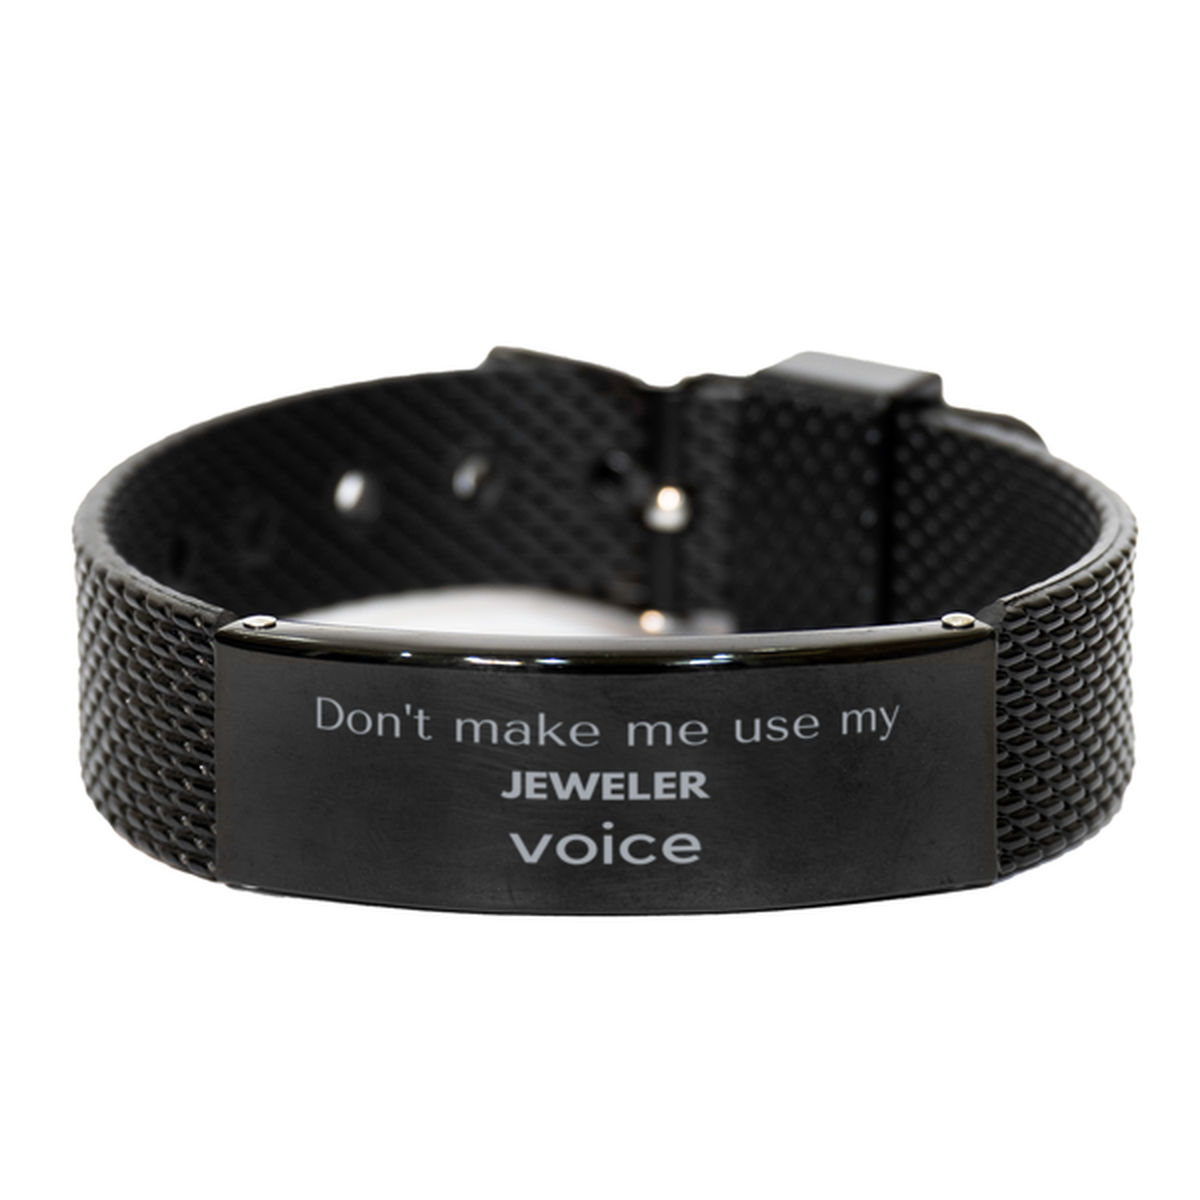 Don't make me use my Jeweler voice, Sarcasm Jeweler Gifts, Christmas Jeweler Black Shark Mesh Bracelet Birthday Unique Gifts For Jeweler Coworkers, Men, Women, Colleague, Friends